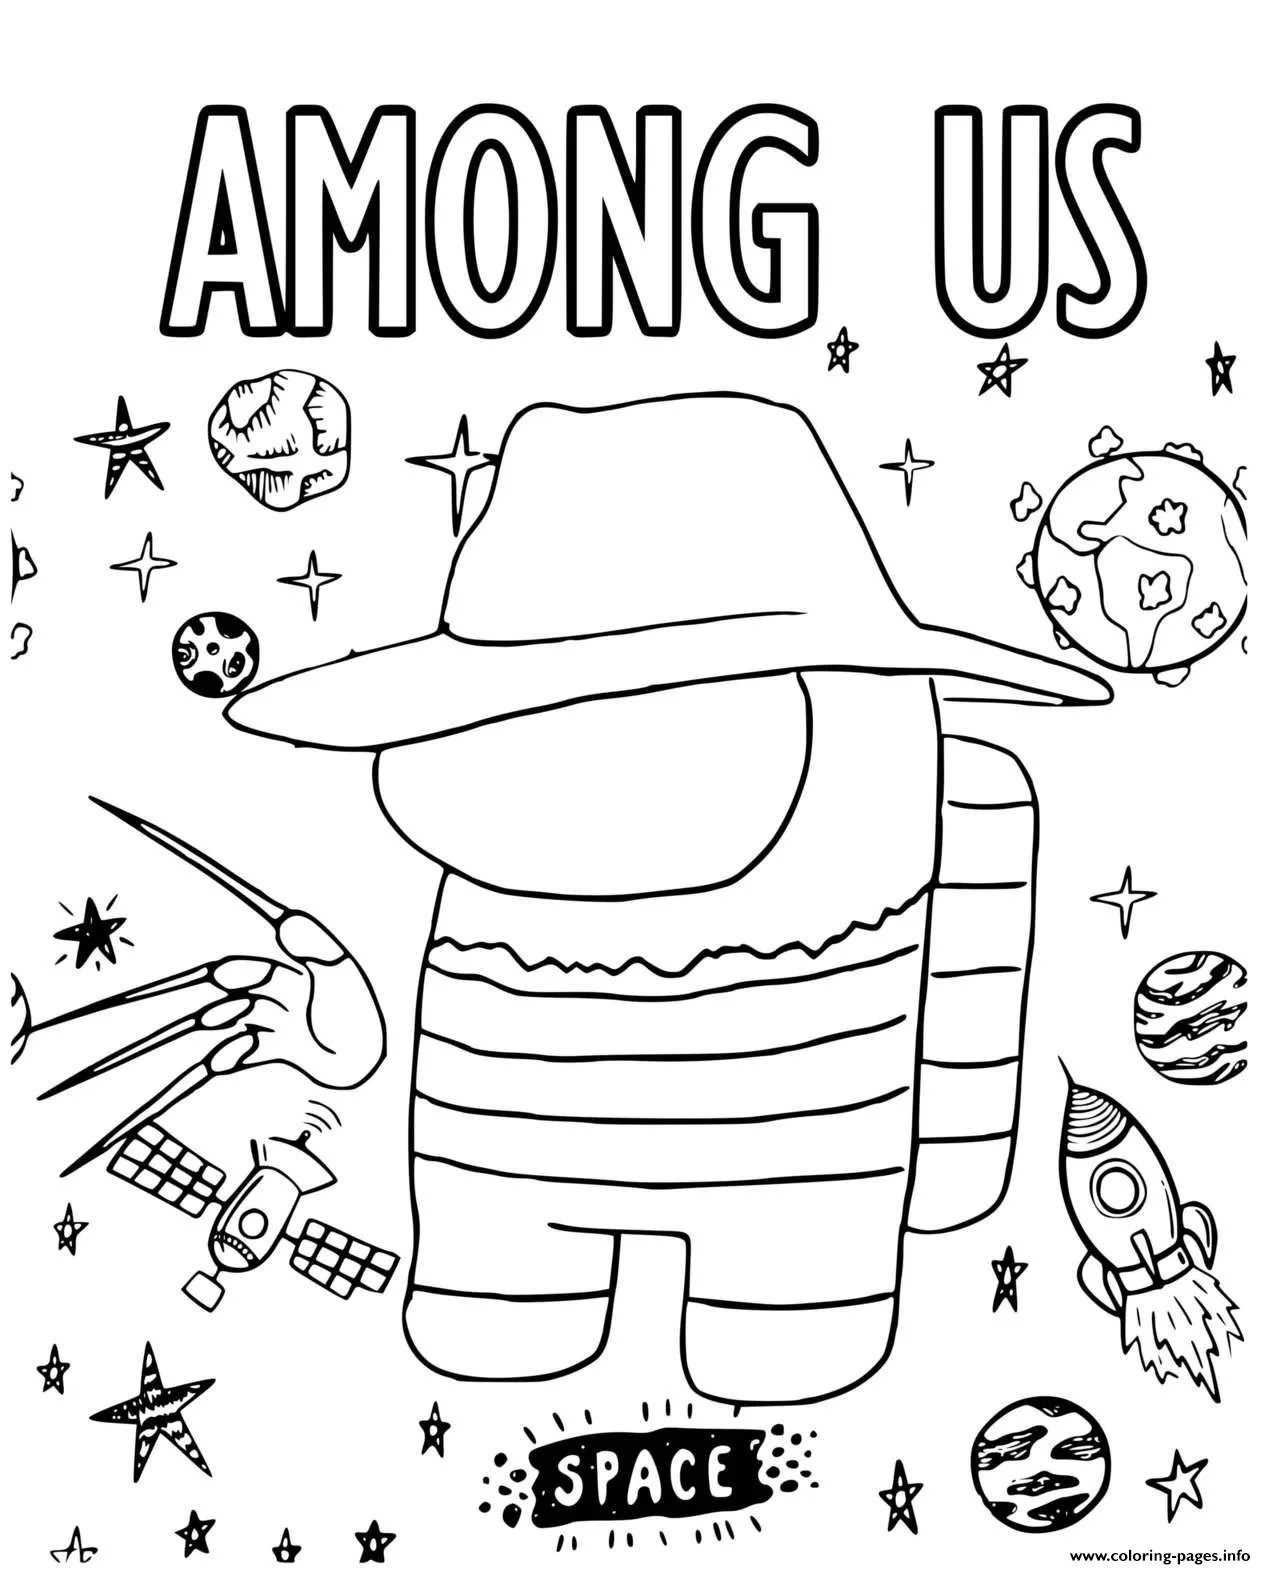 Among Us Coloring Pages